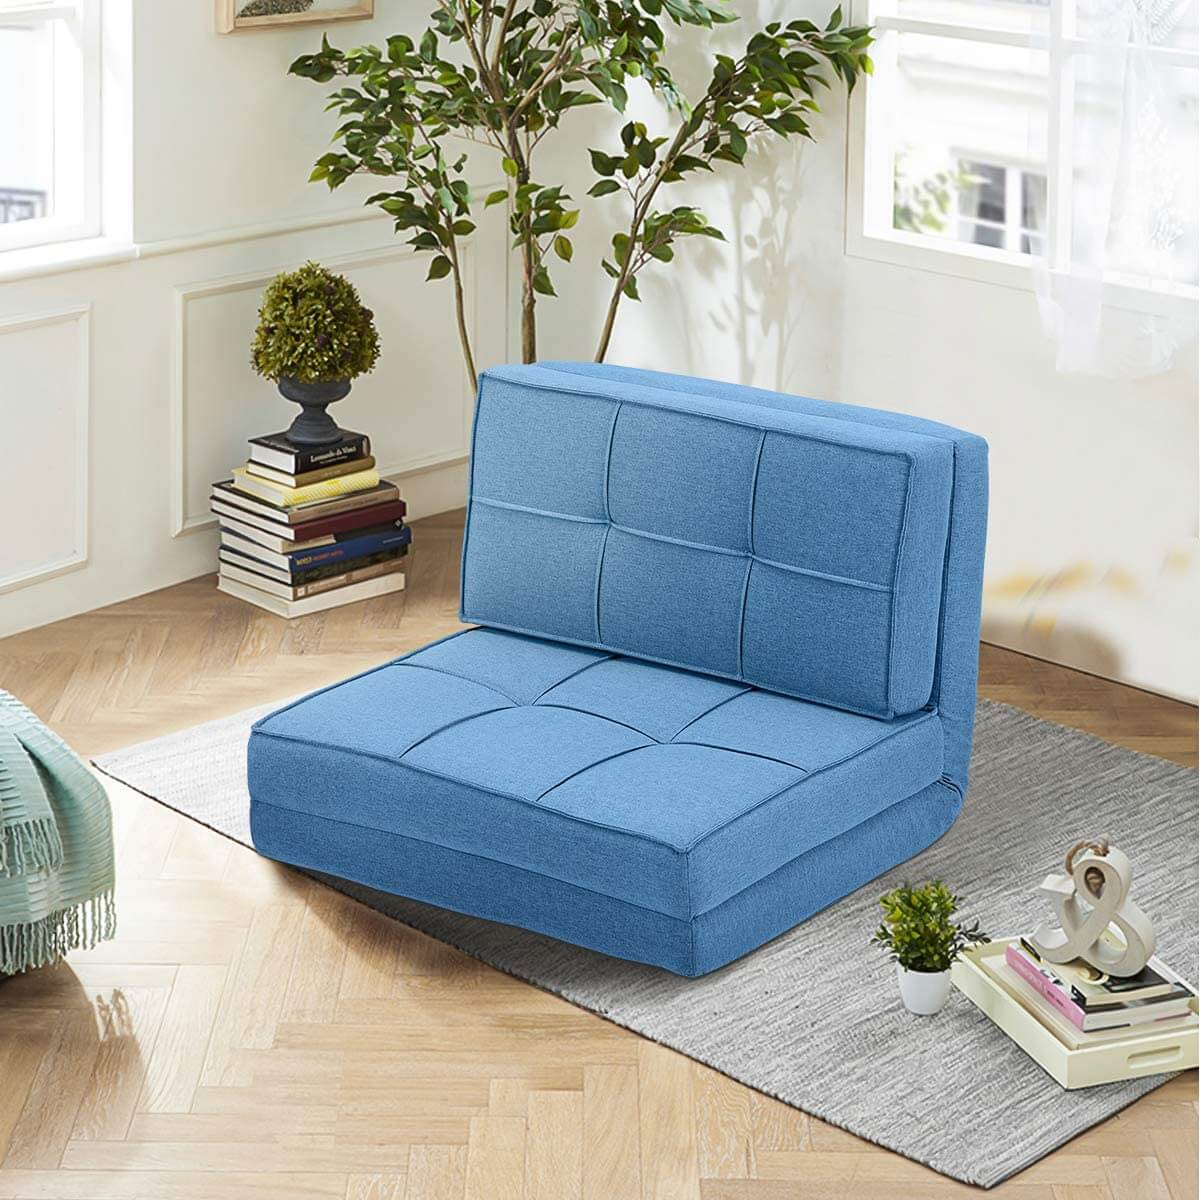 Triple Fold Down Sleeper Sofa Bed, Adjustable Floor Couch Sofa for Living Room, Blue